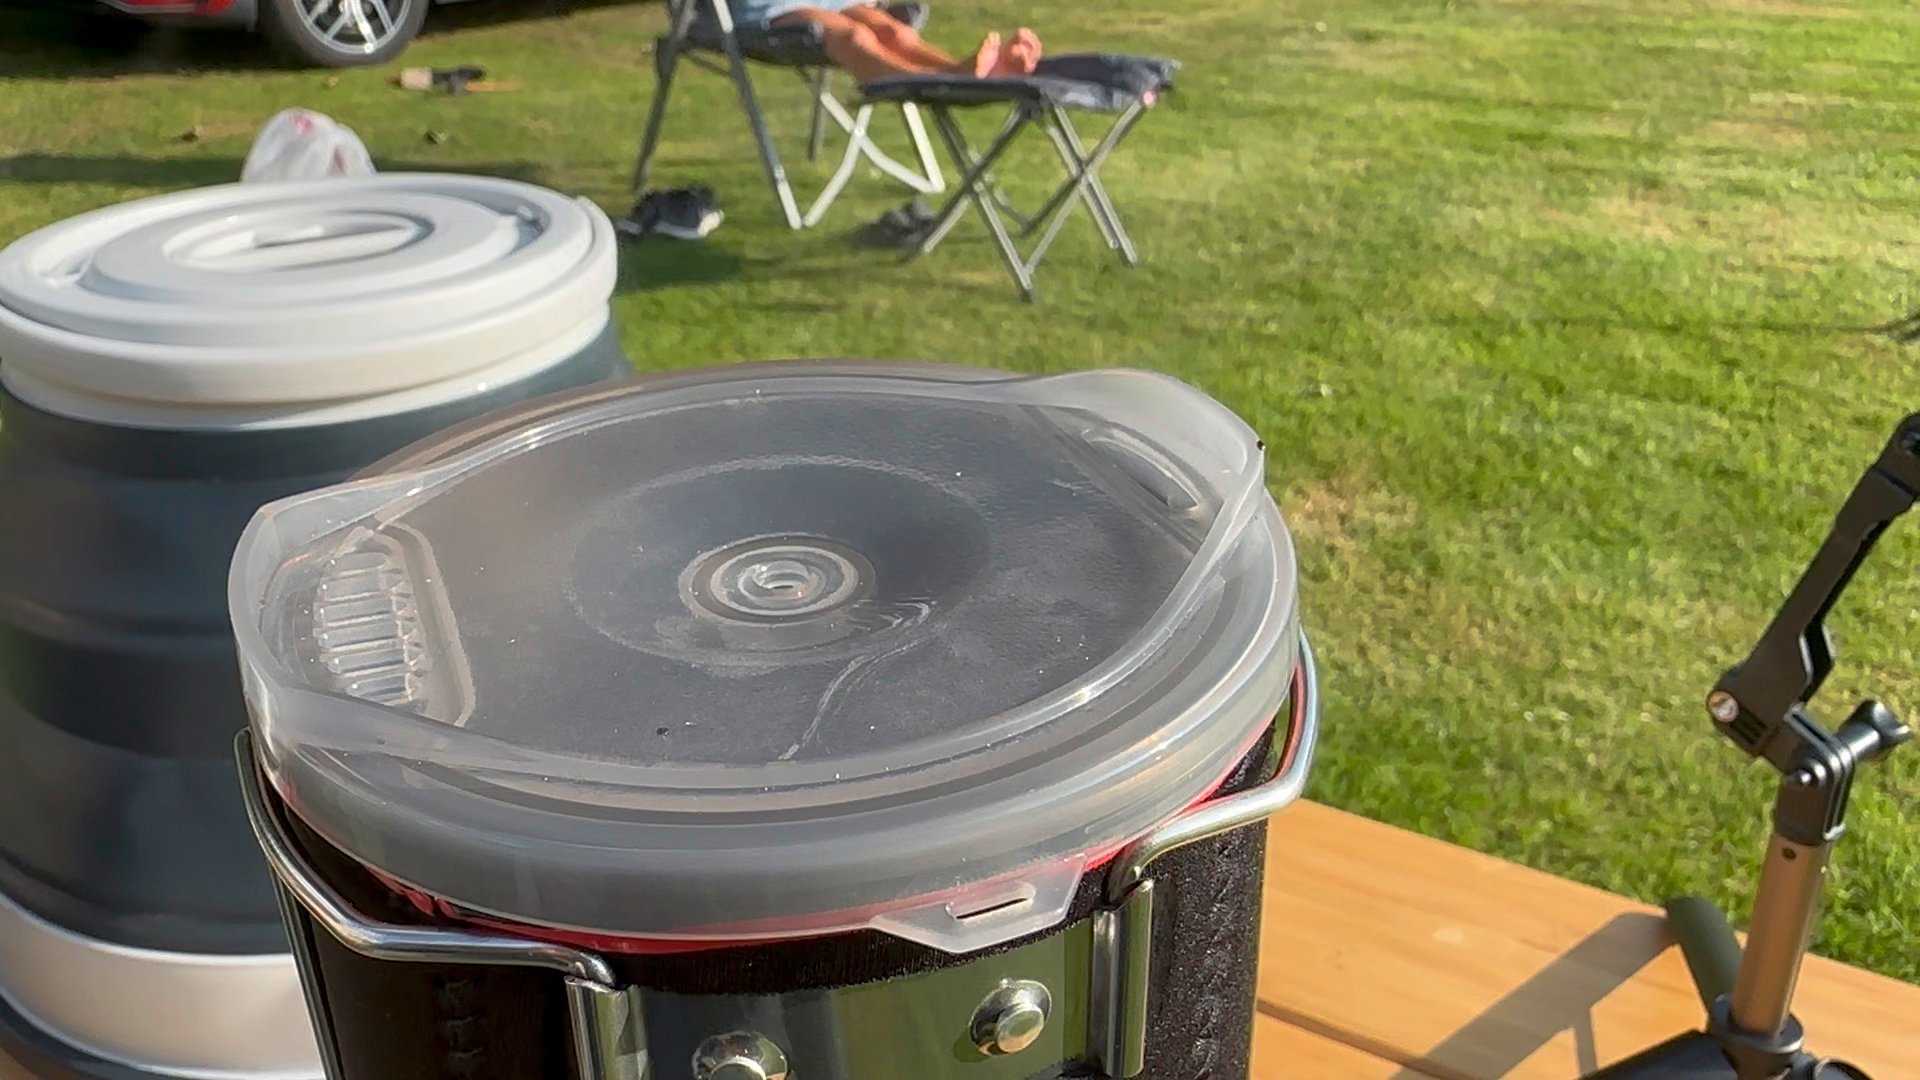 The lid on the OEX Heiro Solo Stove